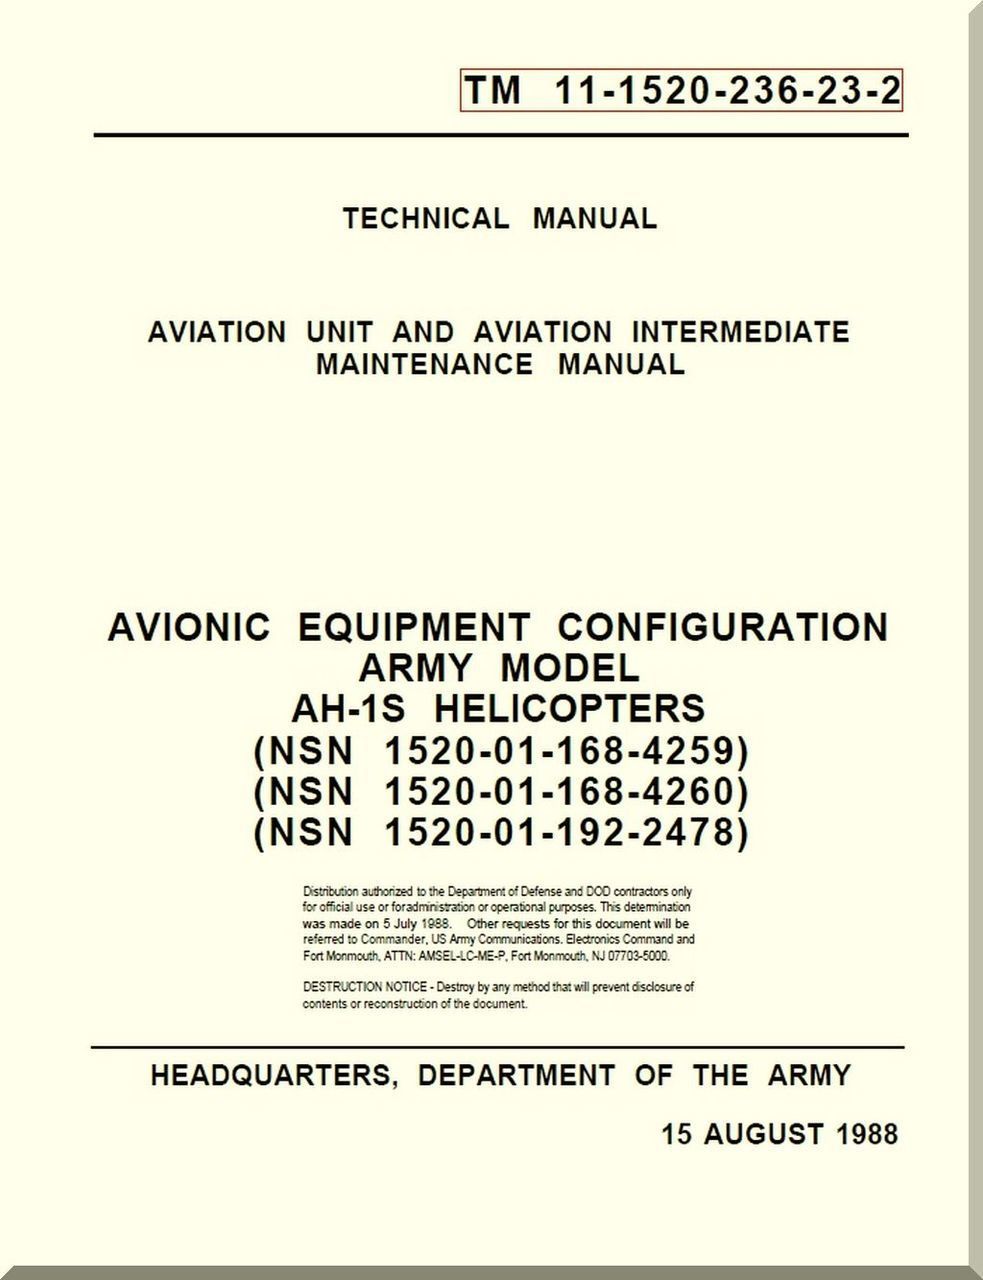 Bell helicopter maintenance manual